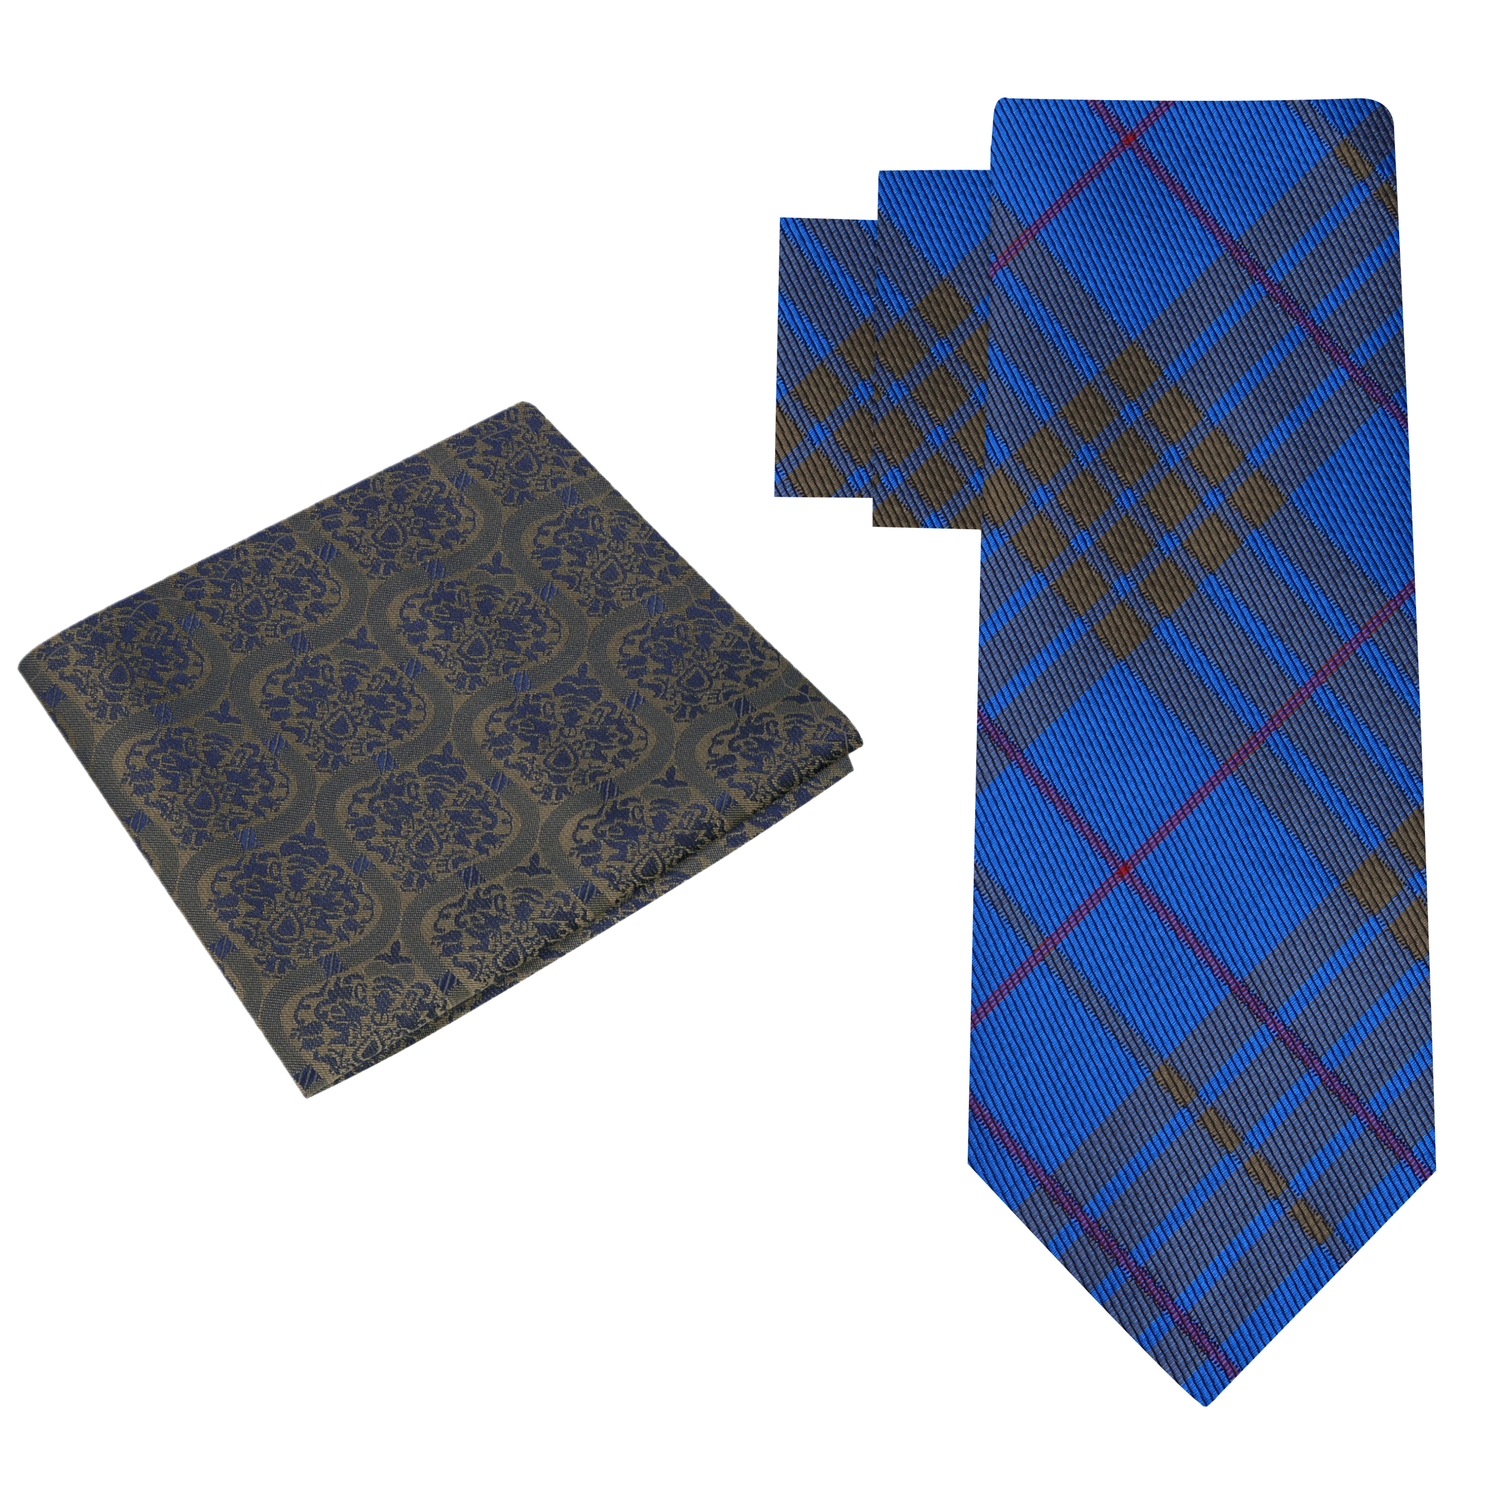 Alt View: Blue, Olive Brown Plaid Necktie and Accenting Olive Blue Abstract Square